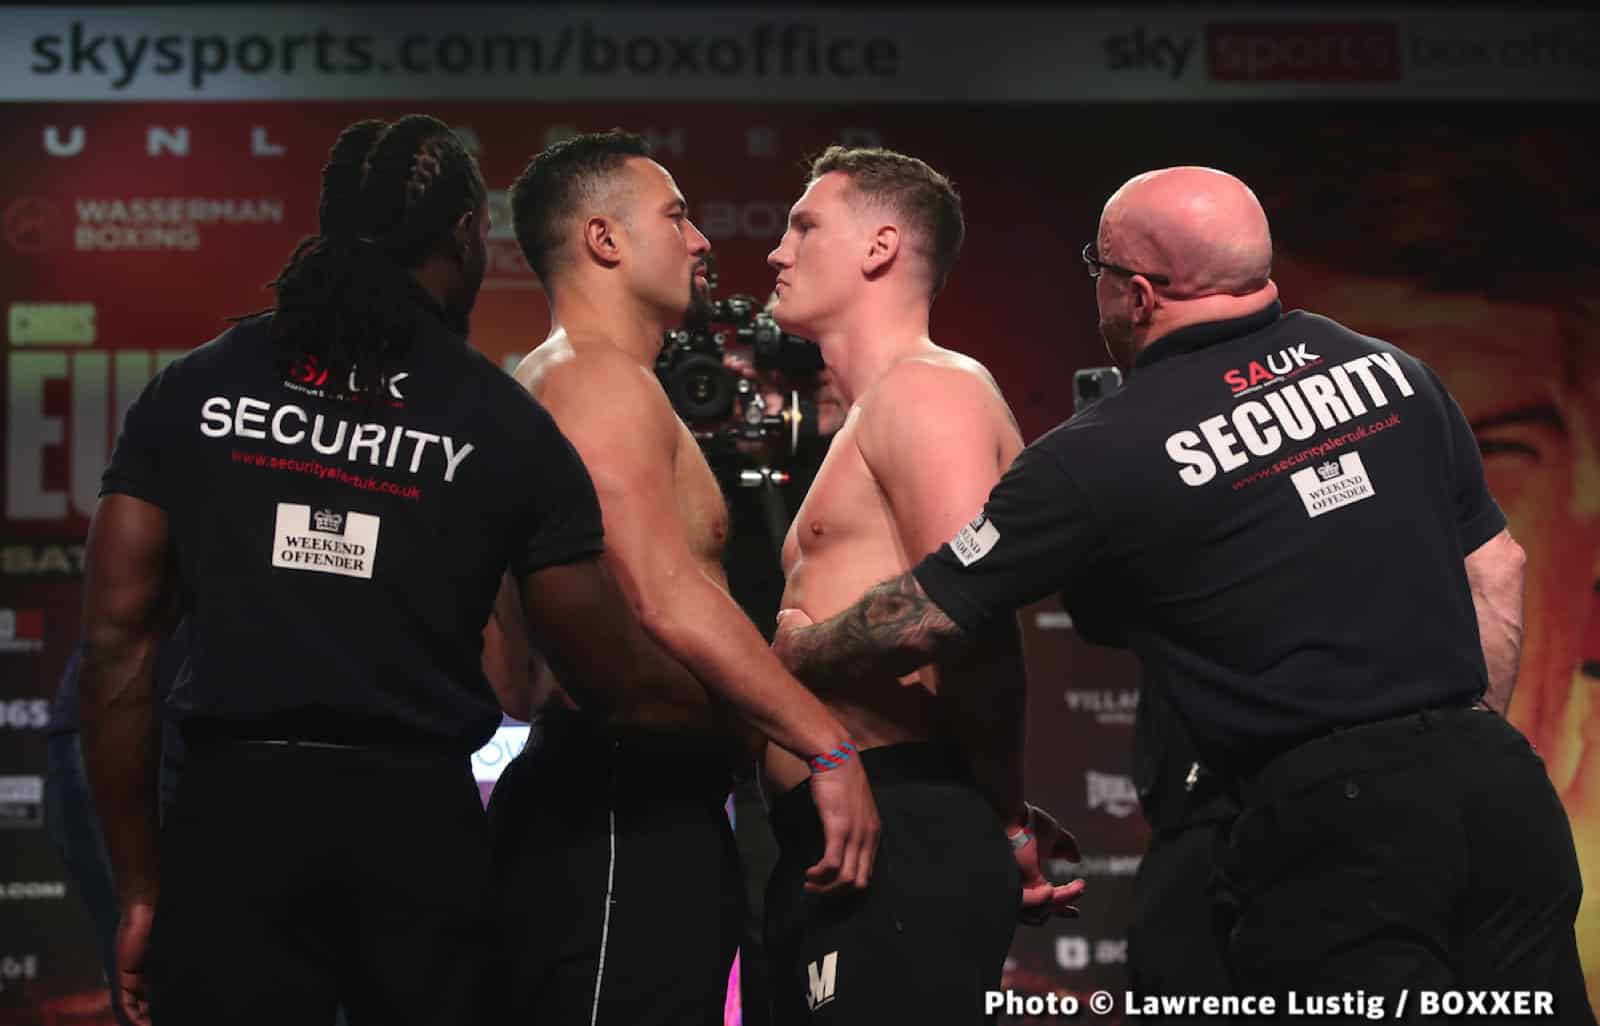 Image: Chris Eubank Jr - Liam Smith Manchester Weigh In Results